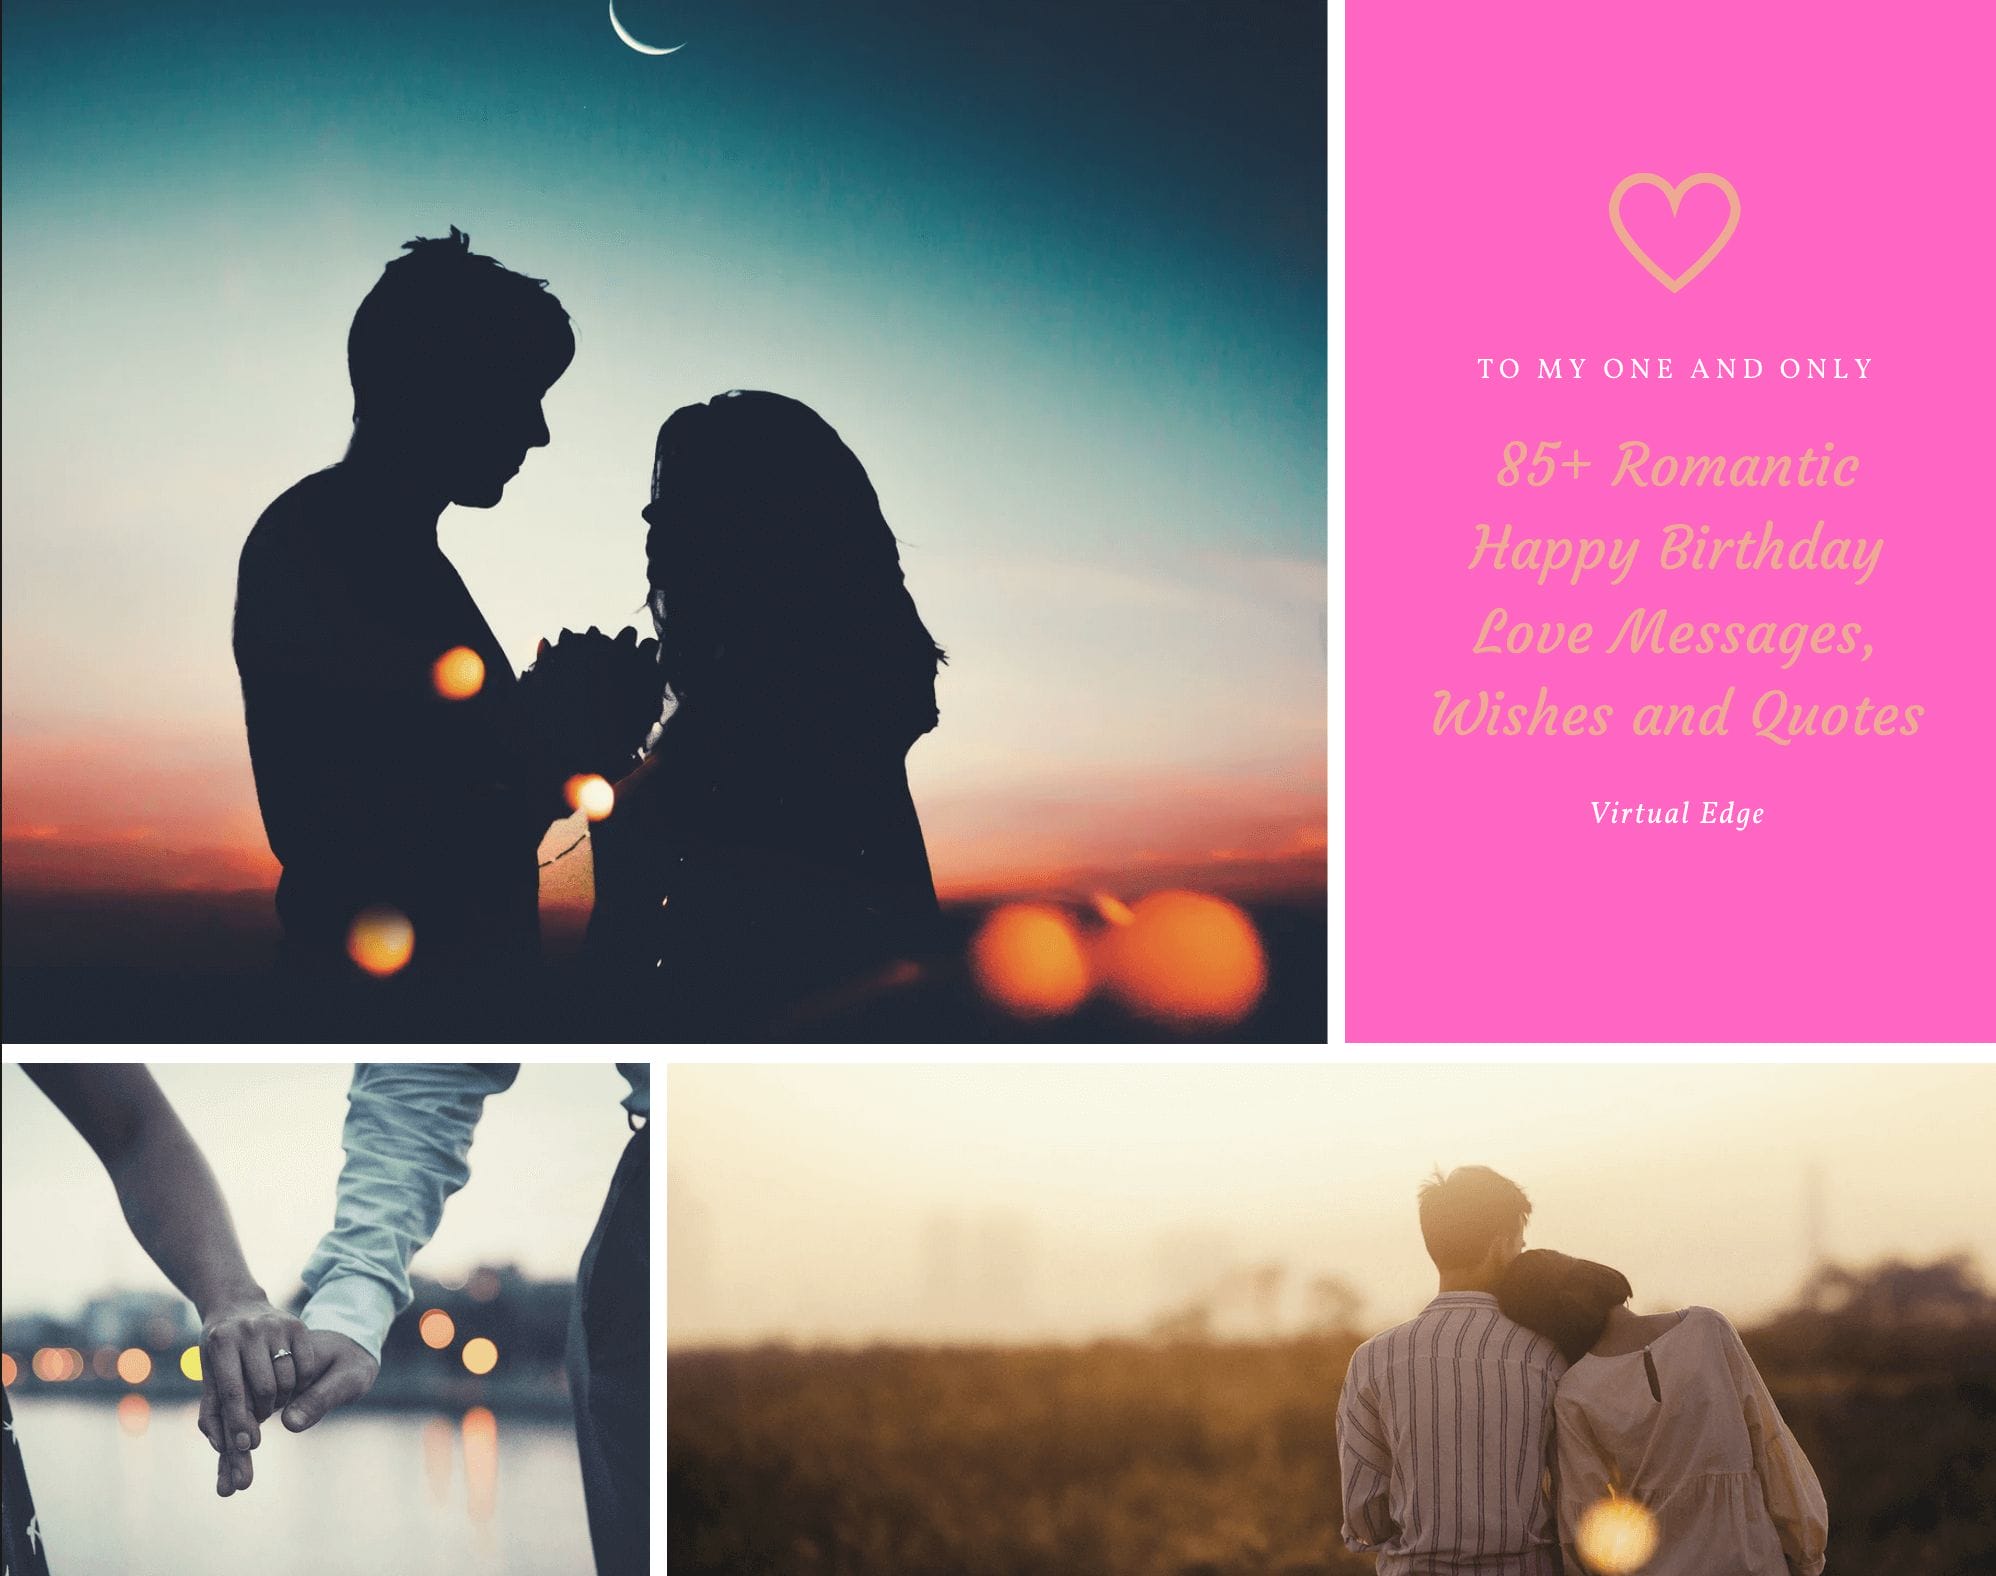 115+ Romantic Happy Birthday Love Messages, Wishes and Quotes